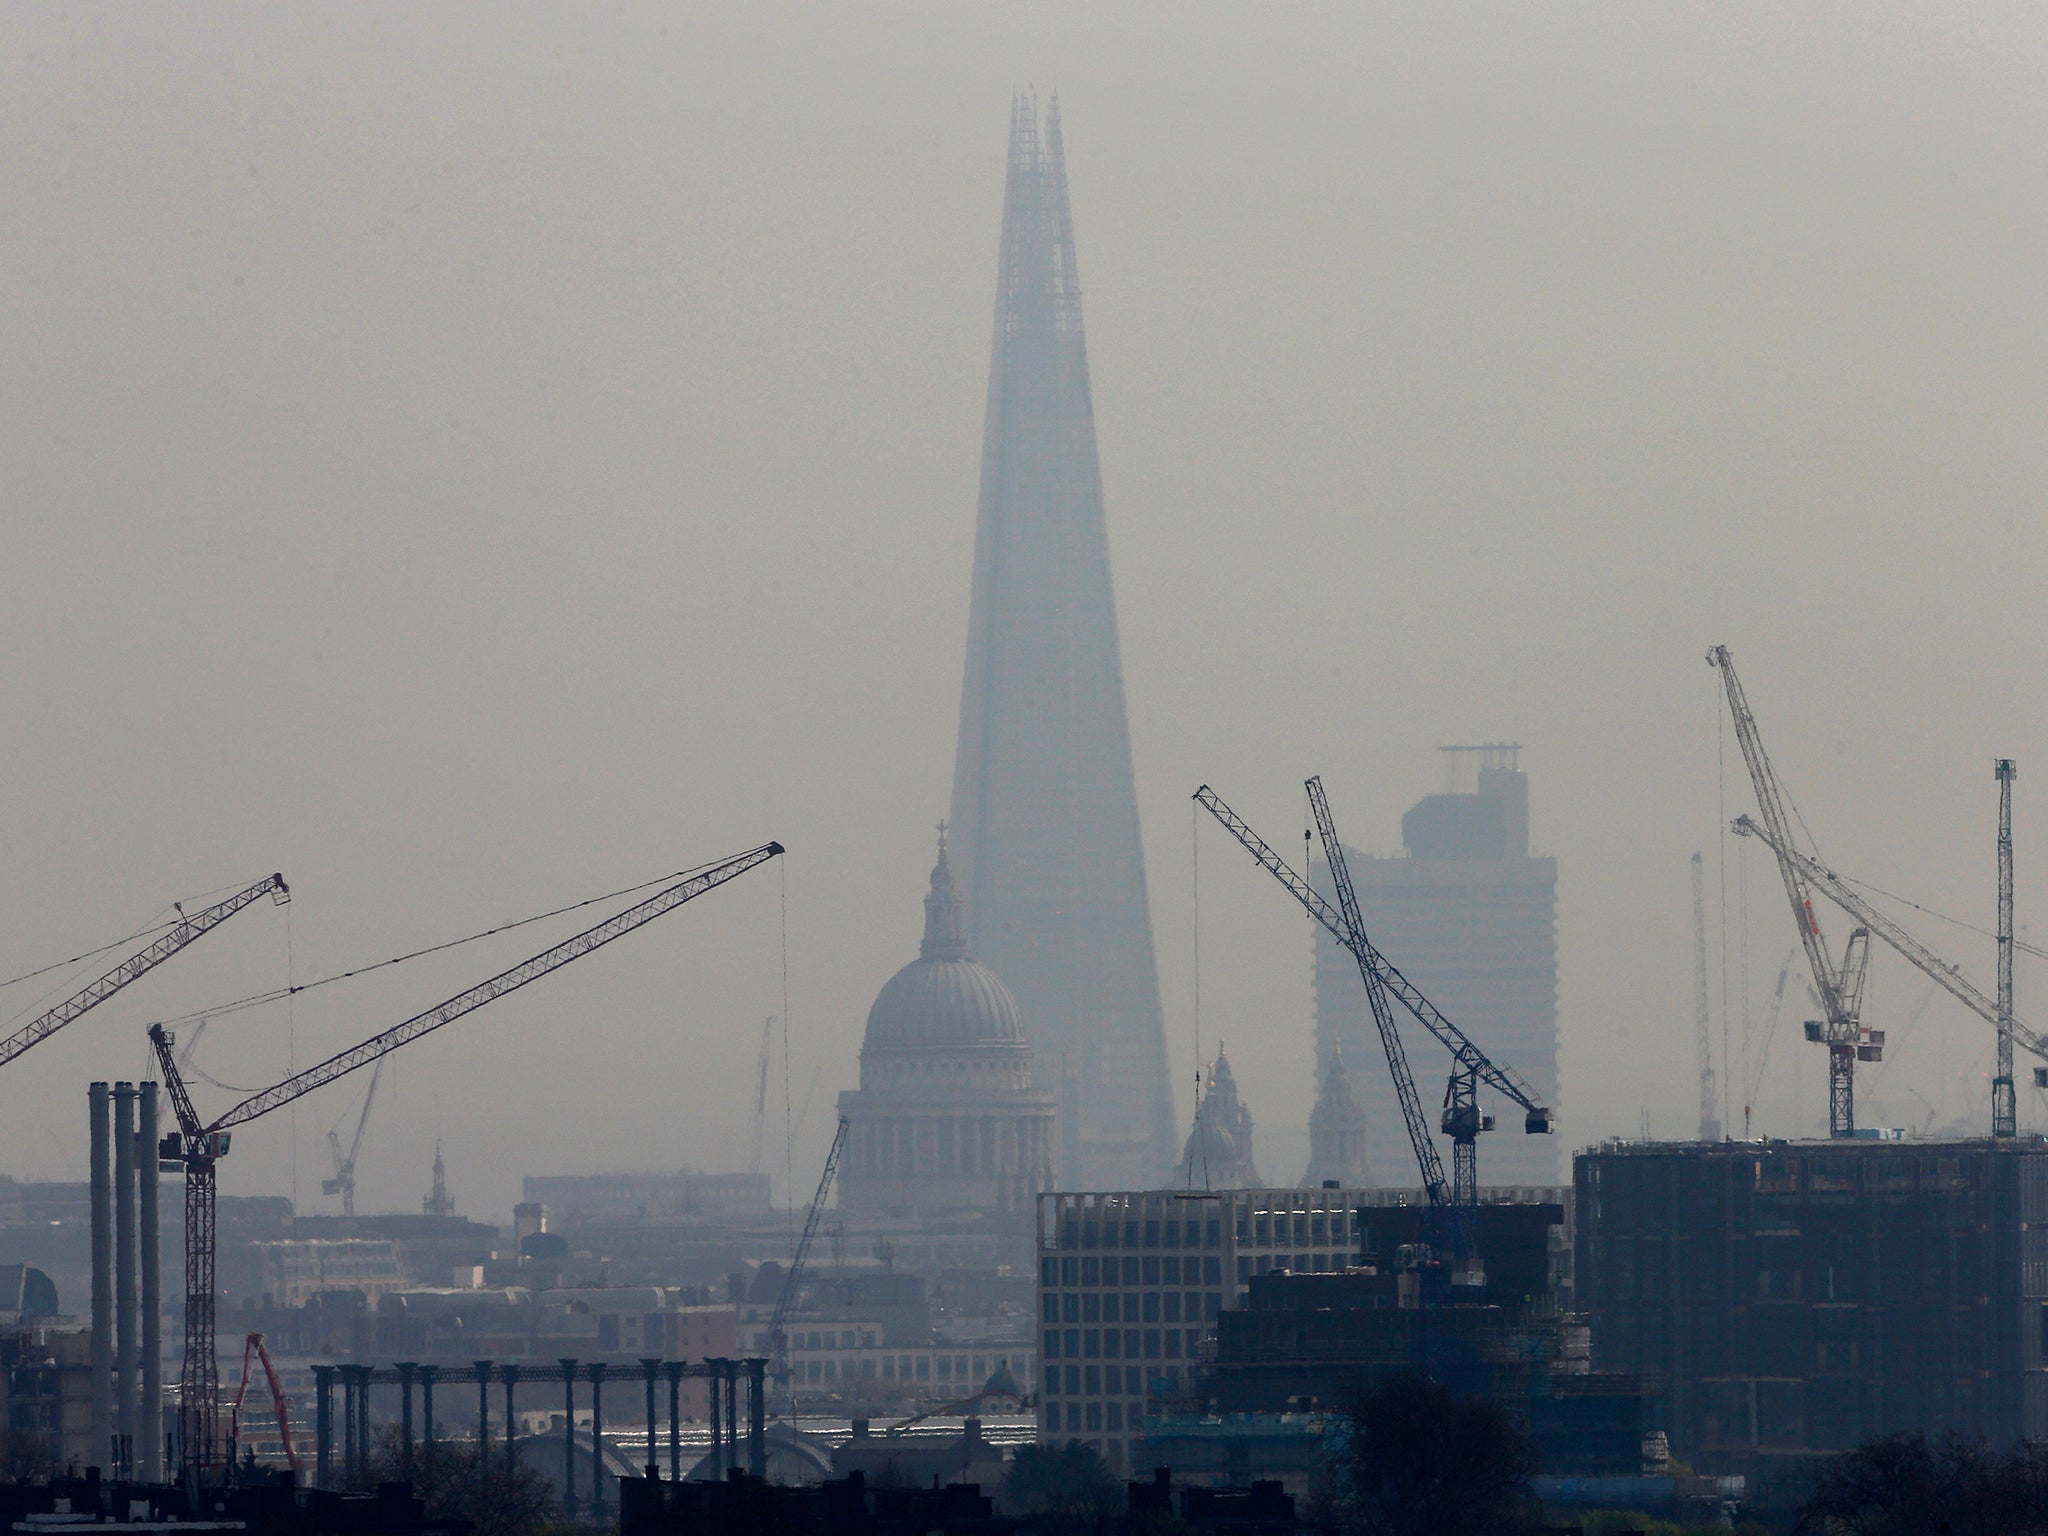 The UK has broken EU air quality regulations every year since 2010